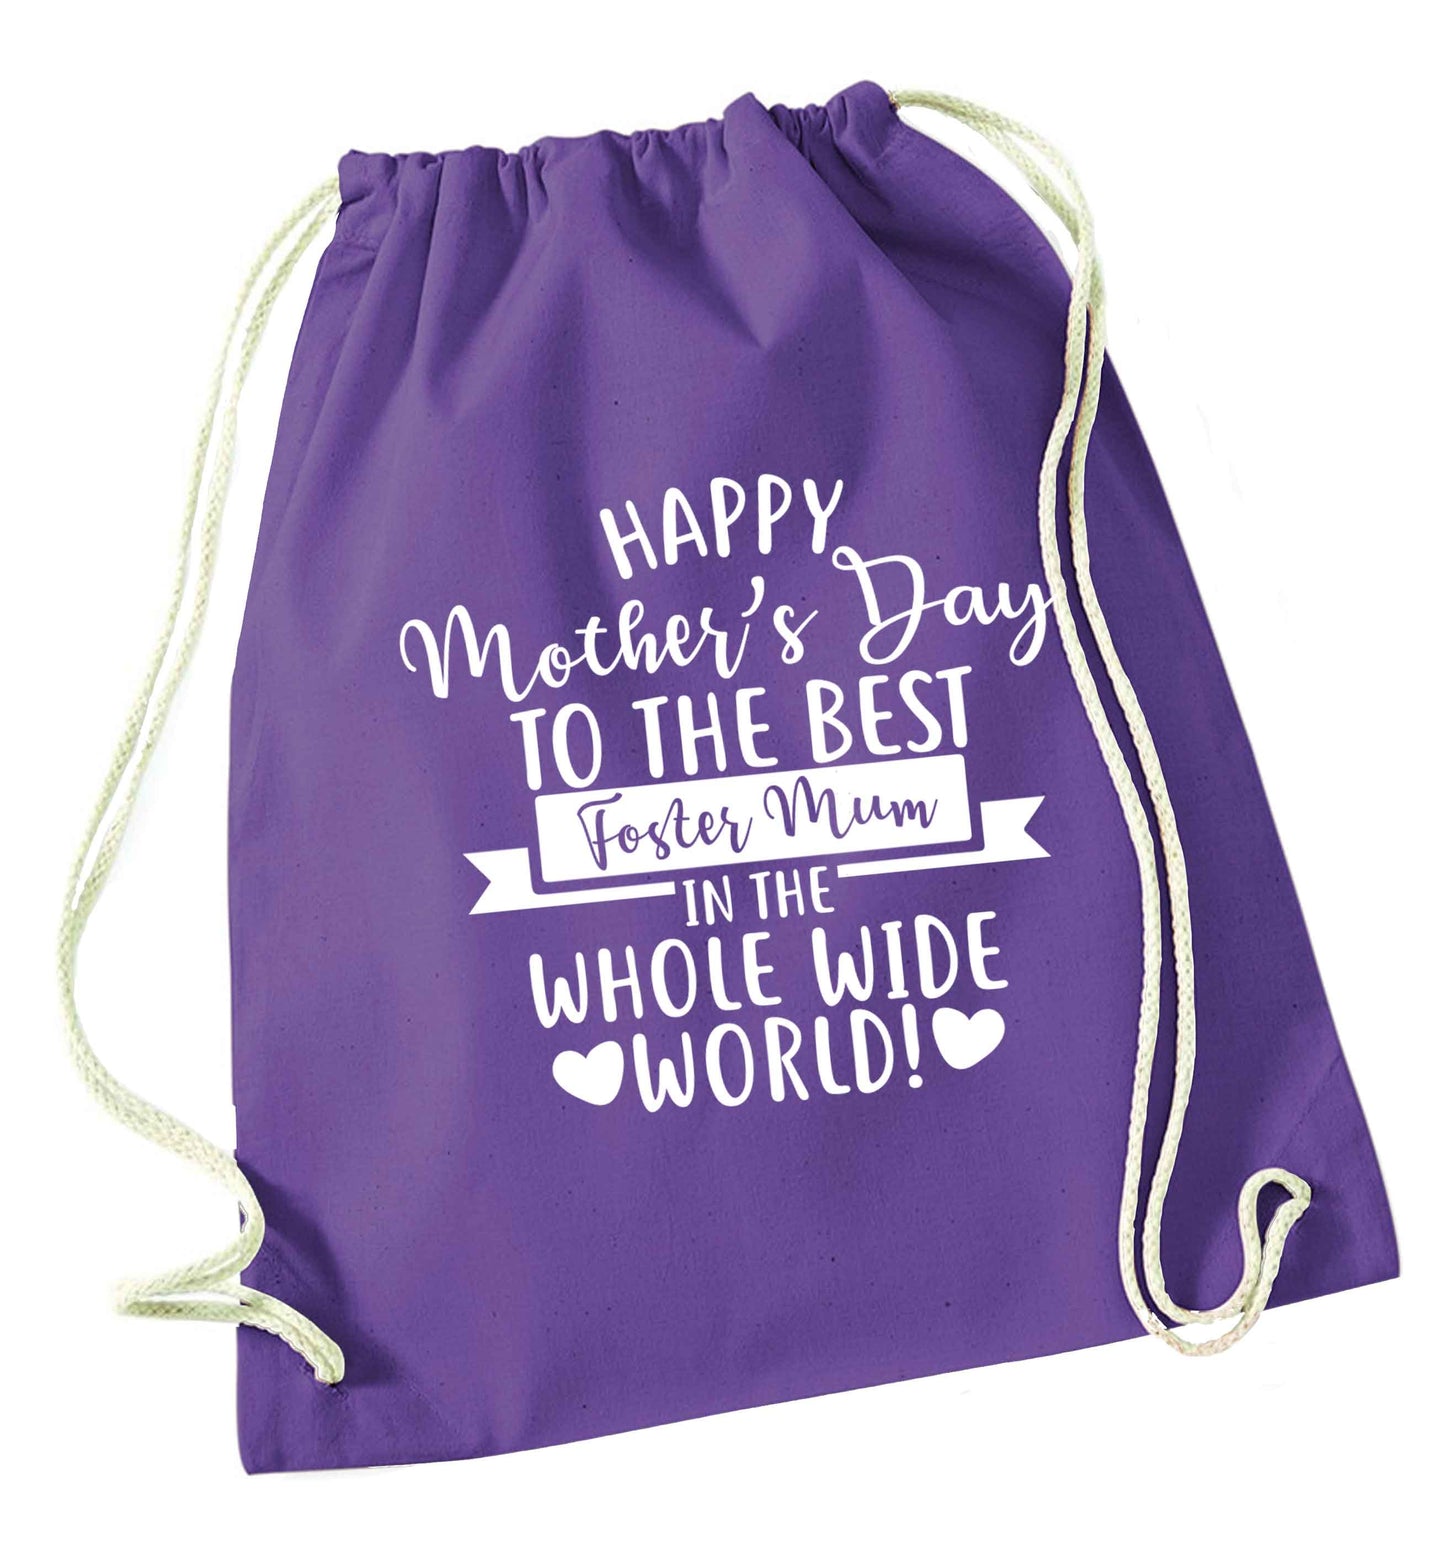 Happy mother's day to the best foster mum in the world purple drawstring bag